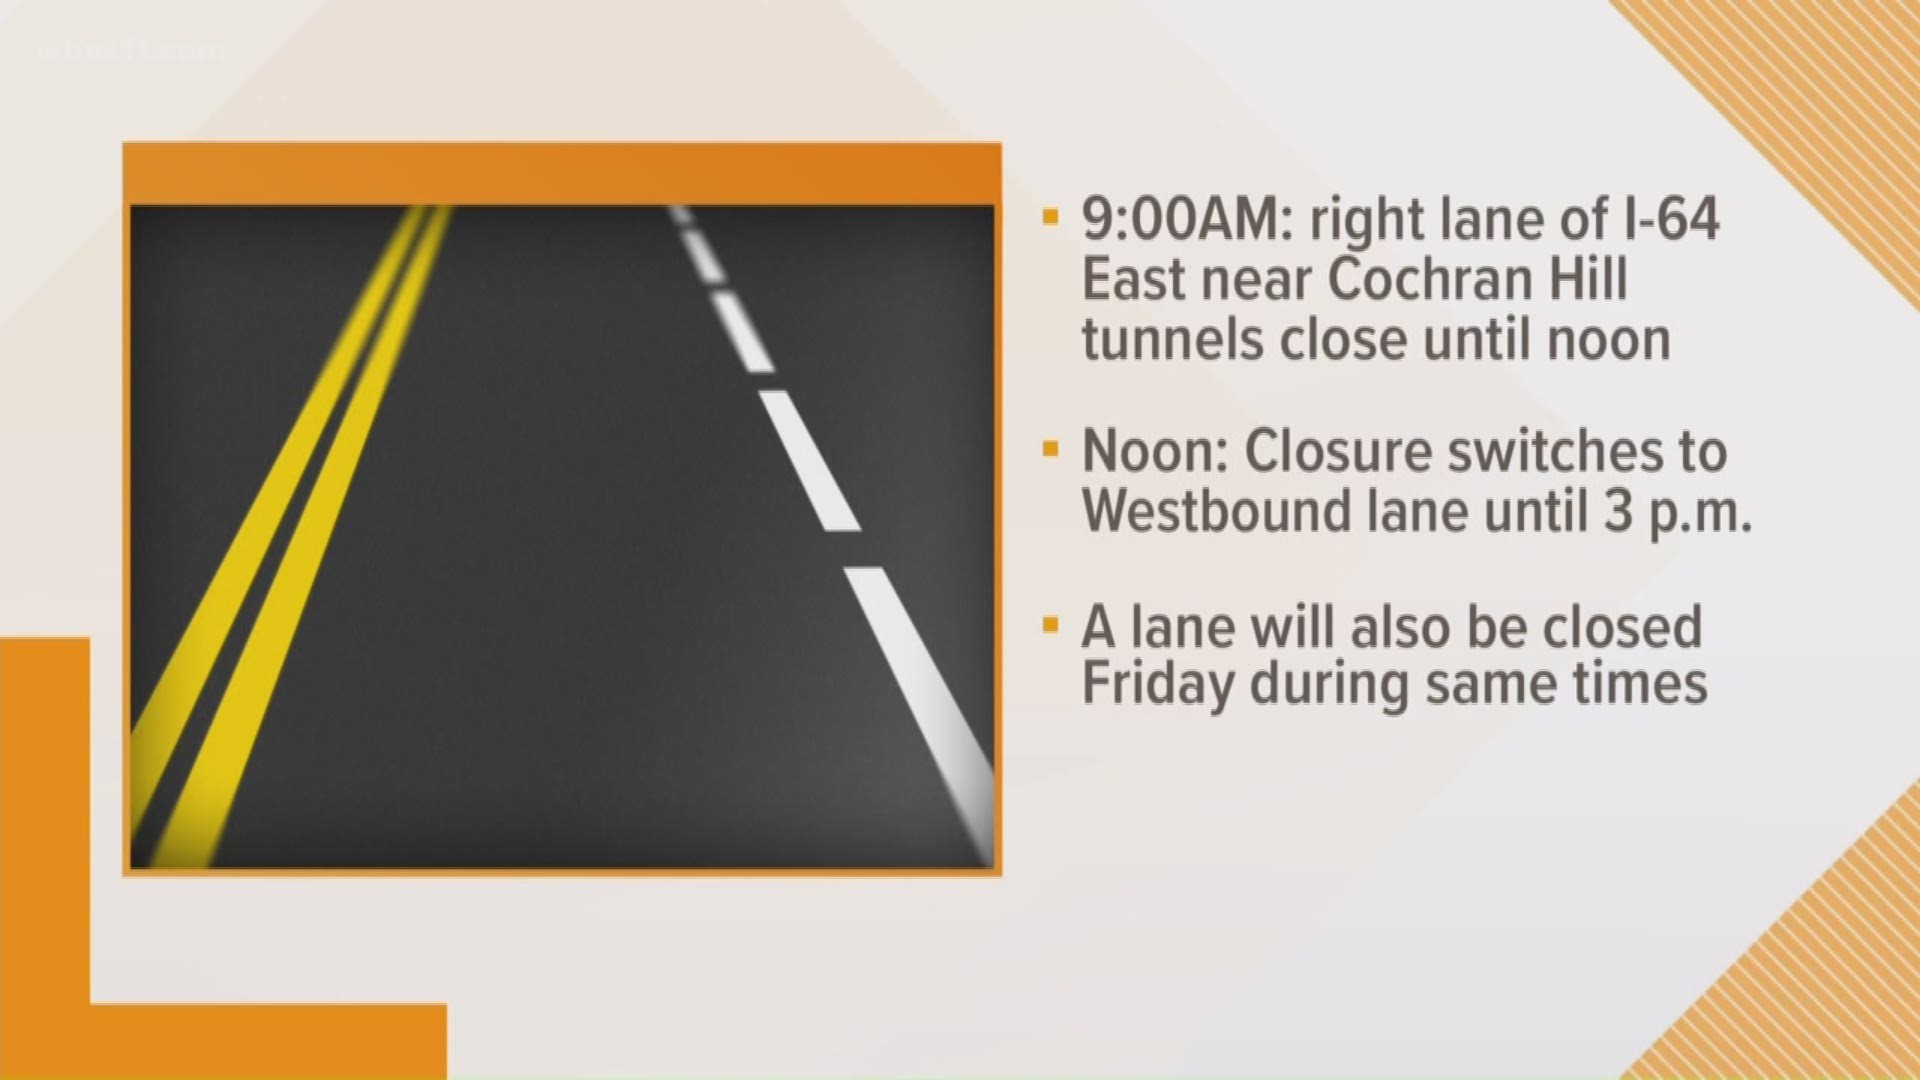 One lane of I-64 will be closed on Thursday and Friday while crews clean the tunnels before they are inspected next week.